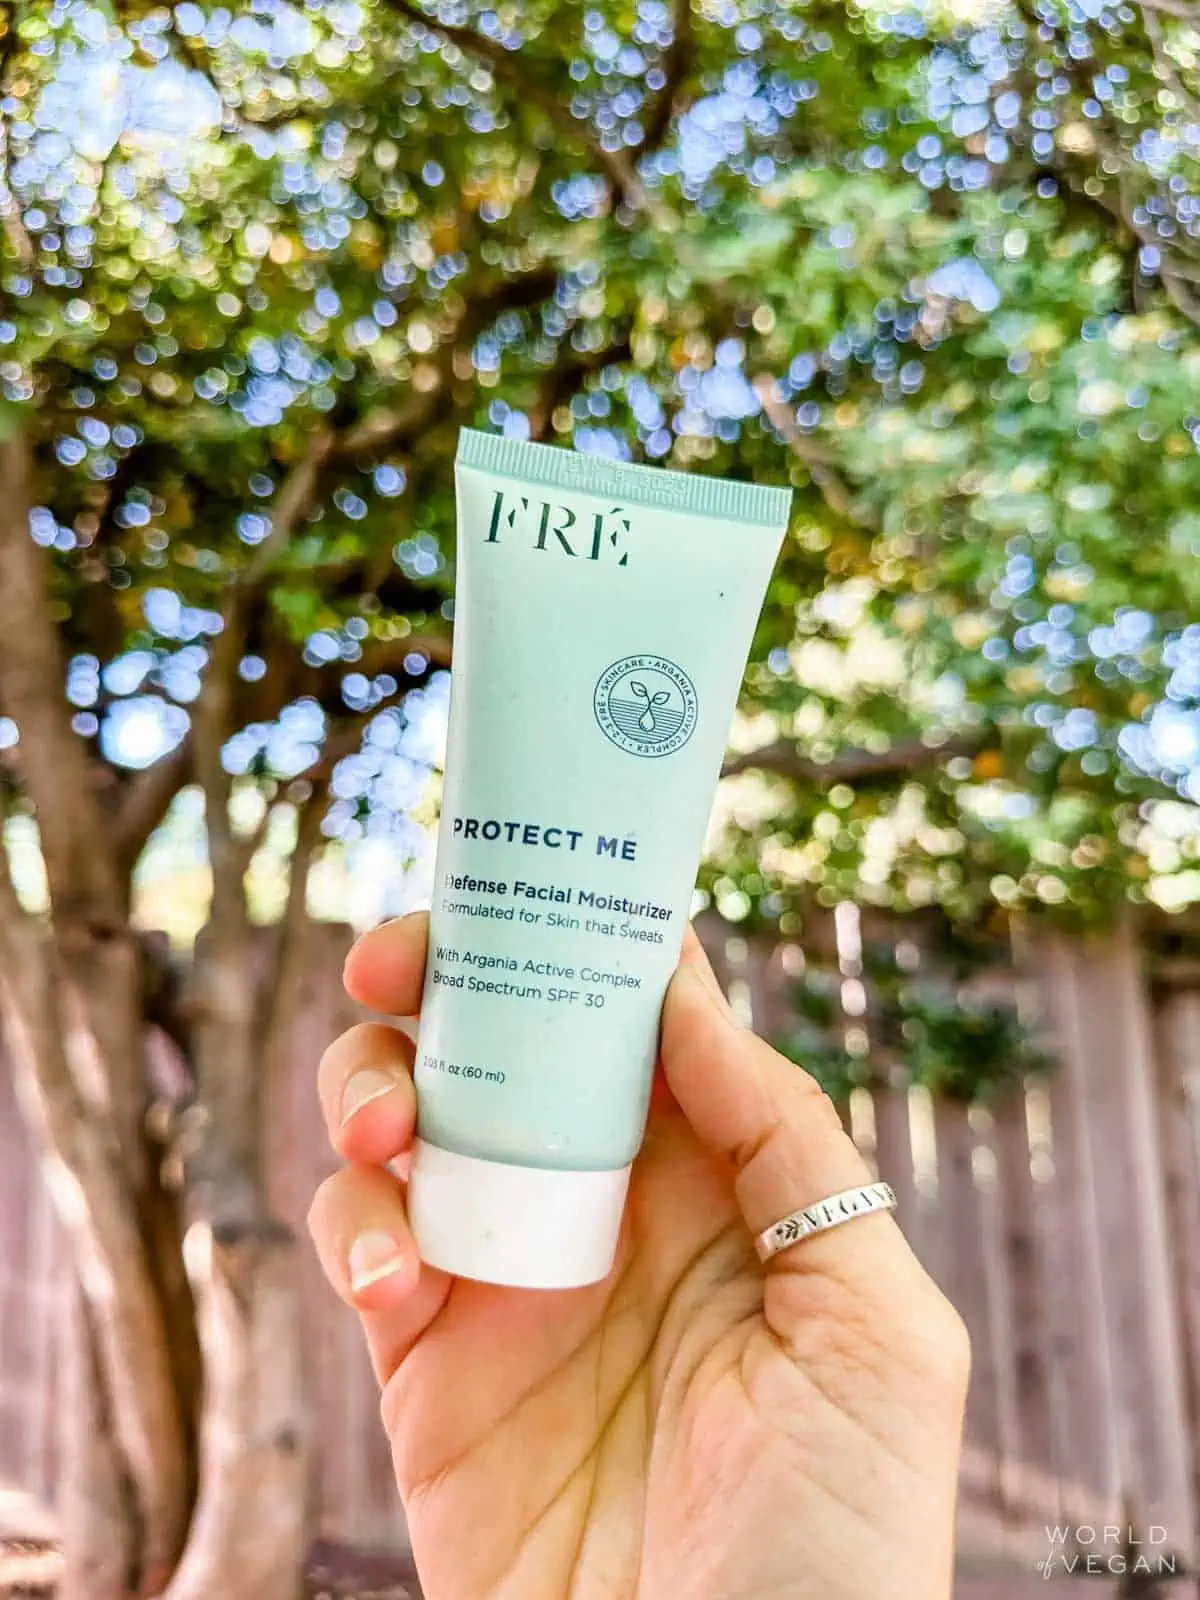 Holding out the pale blue tube of vegan face sunscreen designed for active women from the brand Fre. 